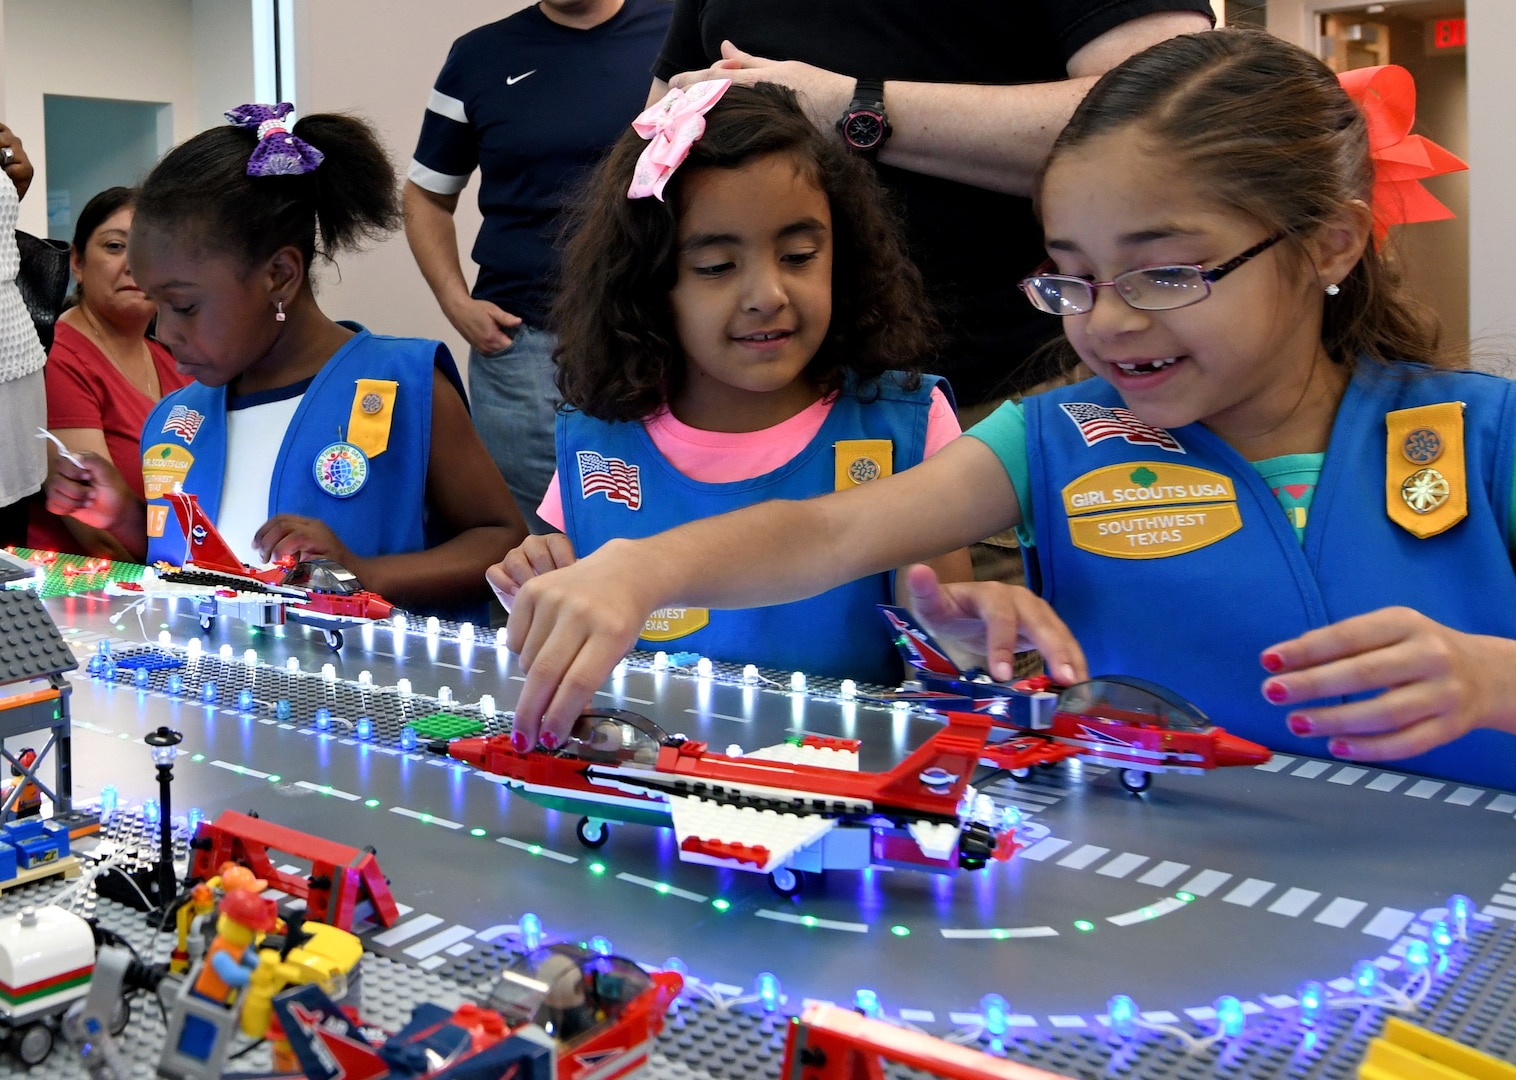 San Antonio-area Girl Scouts visit the 90th Cyberspace Operations Squadron “Bricks in the Loop” at Joint Base San Antonio-Lackland for a tour April 19, 2019. “Bricks in the Loop” mimics an Air Force installation with items such as a fire station, police station, airport, jets and tanker trucks, all used to simulate real-world cyber systems in training cyber operators.